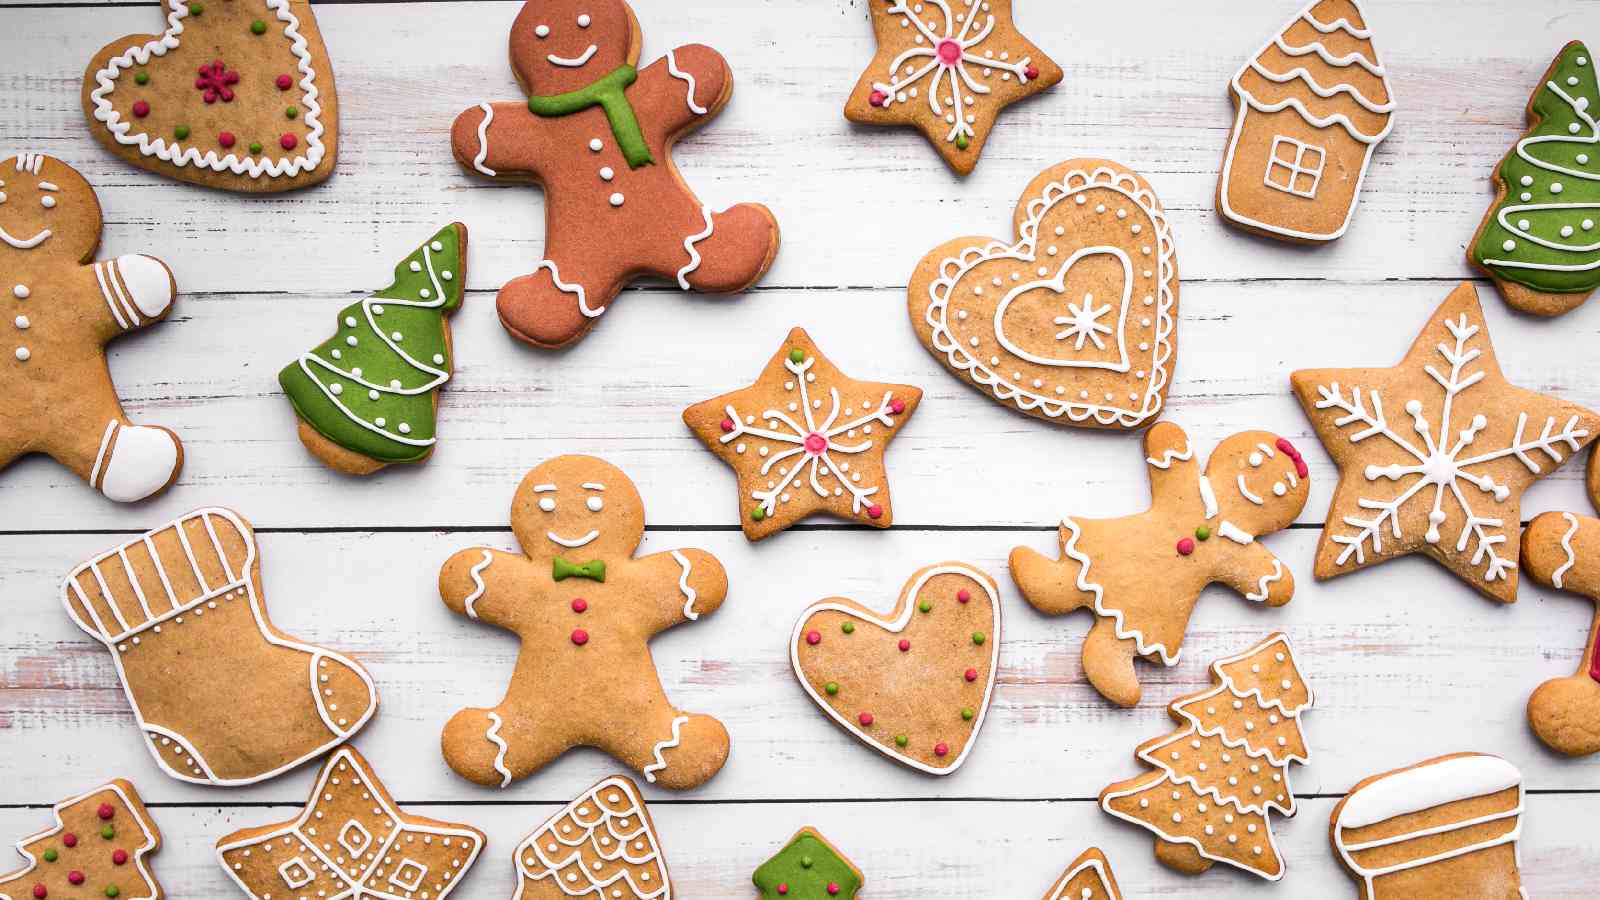 6 best healthy Christmas cookie recipes